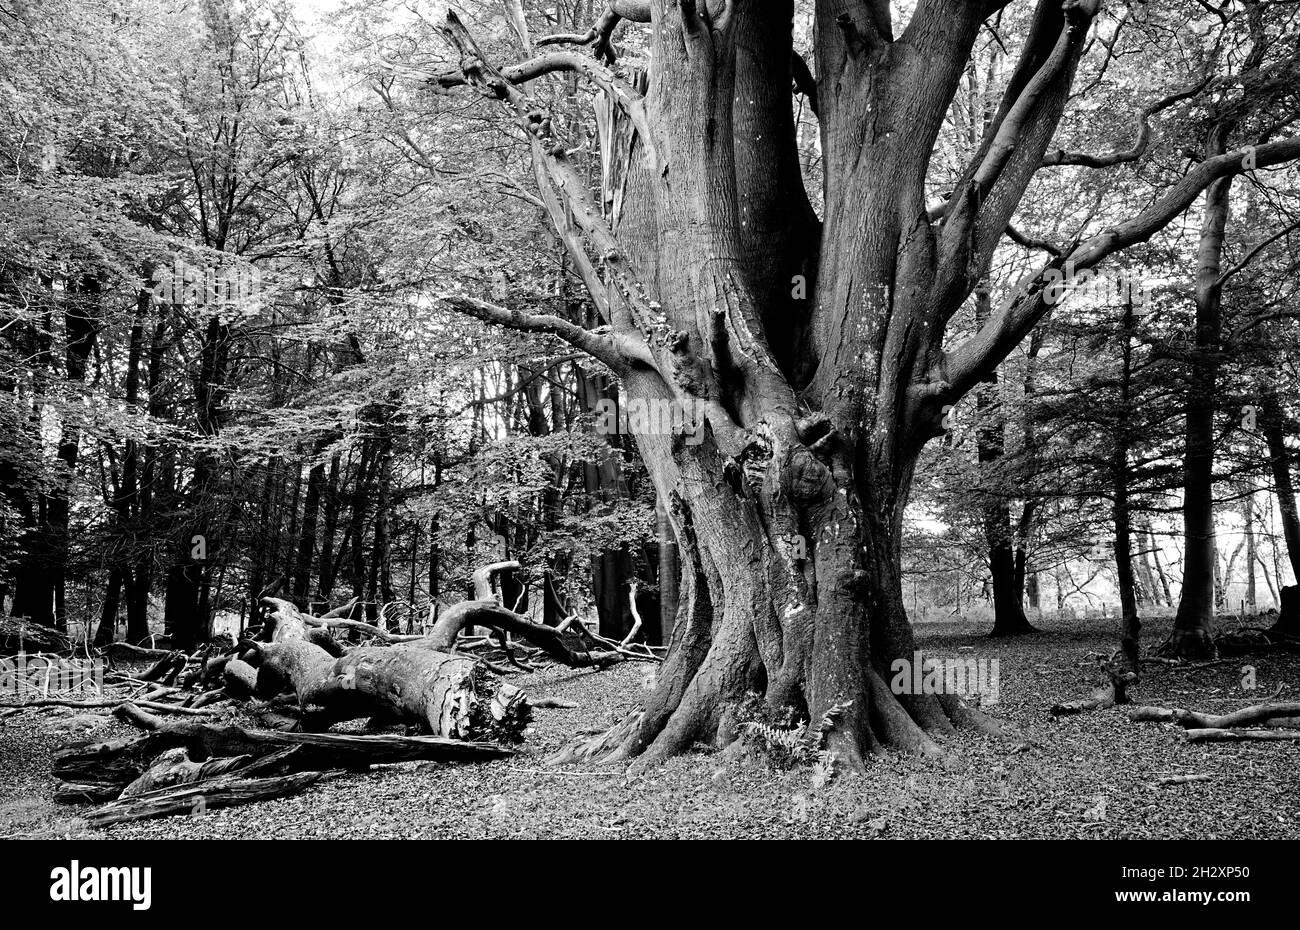 Woodland trees in high contrast black and white. Stock Photo